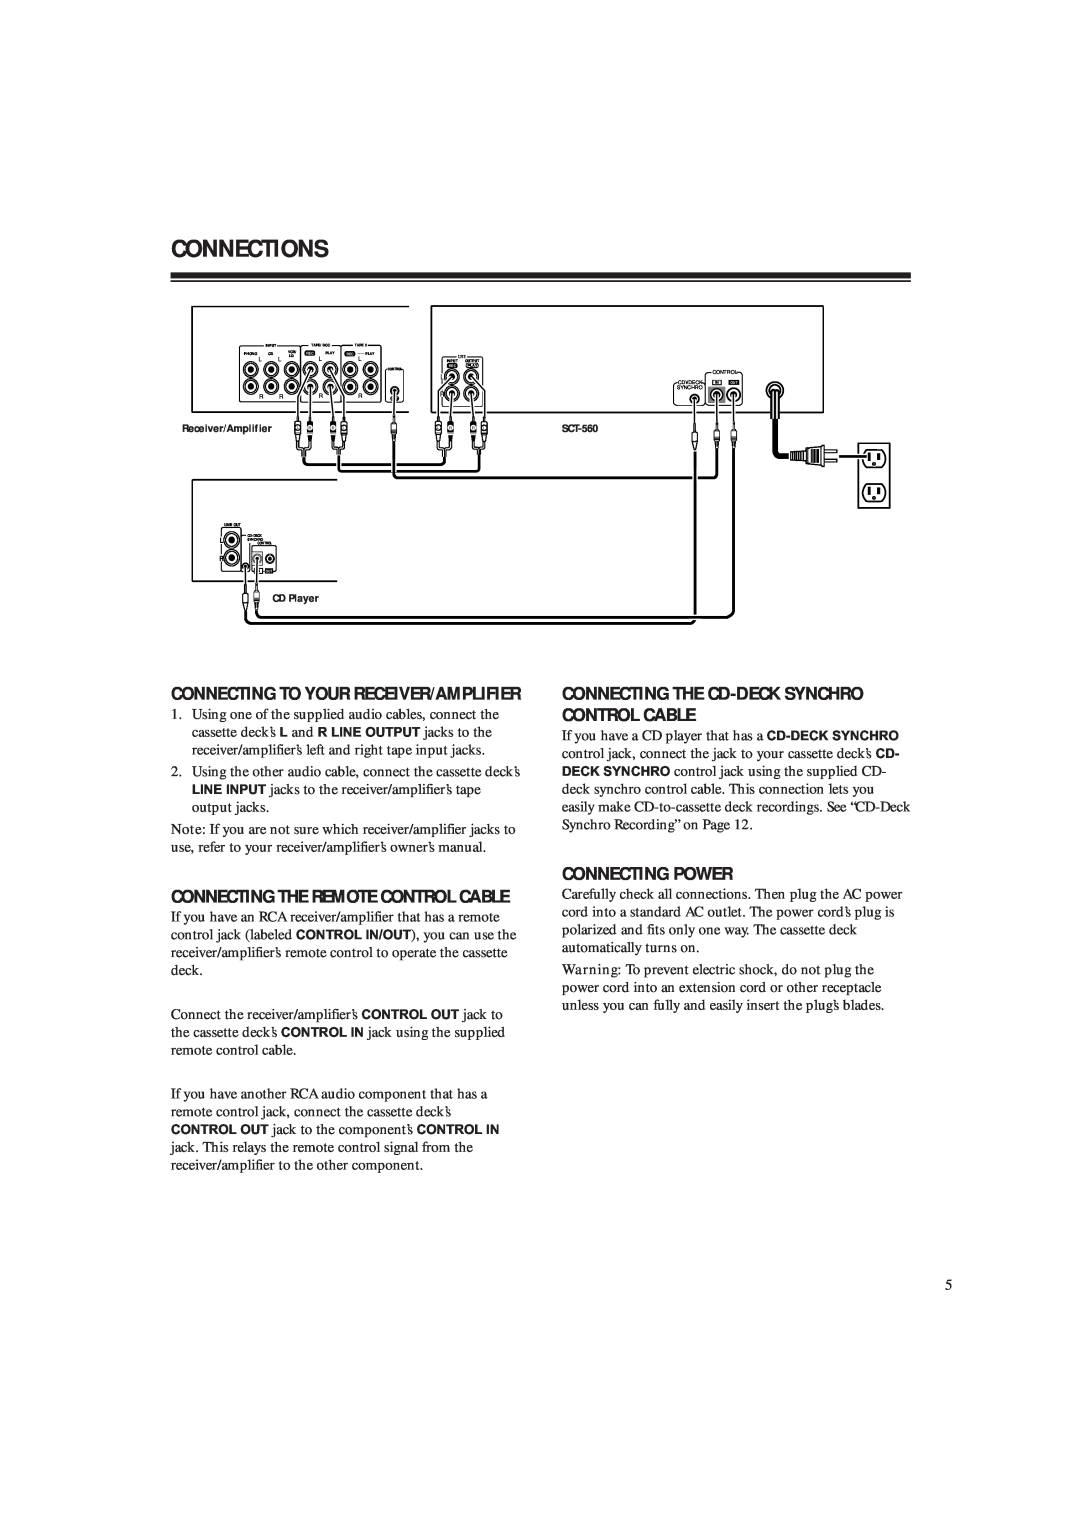 RCA SCT-560 owner manual Connections, Connecting The Cd-Decksynchro Control Cable, Connecting Power 